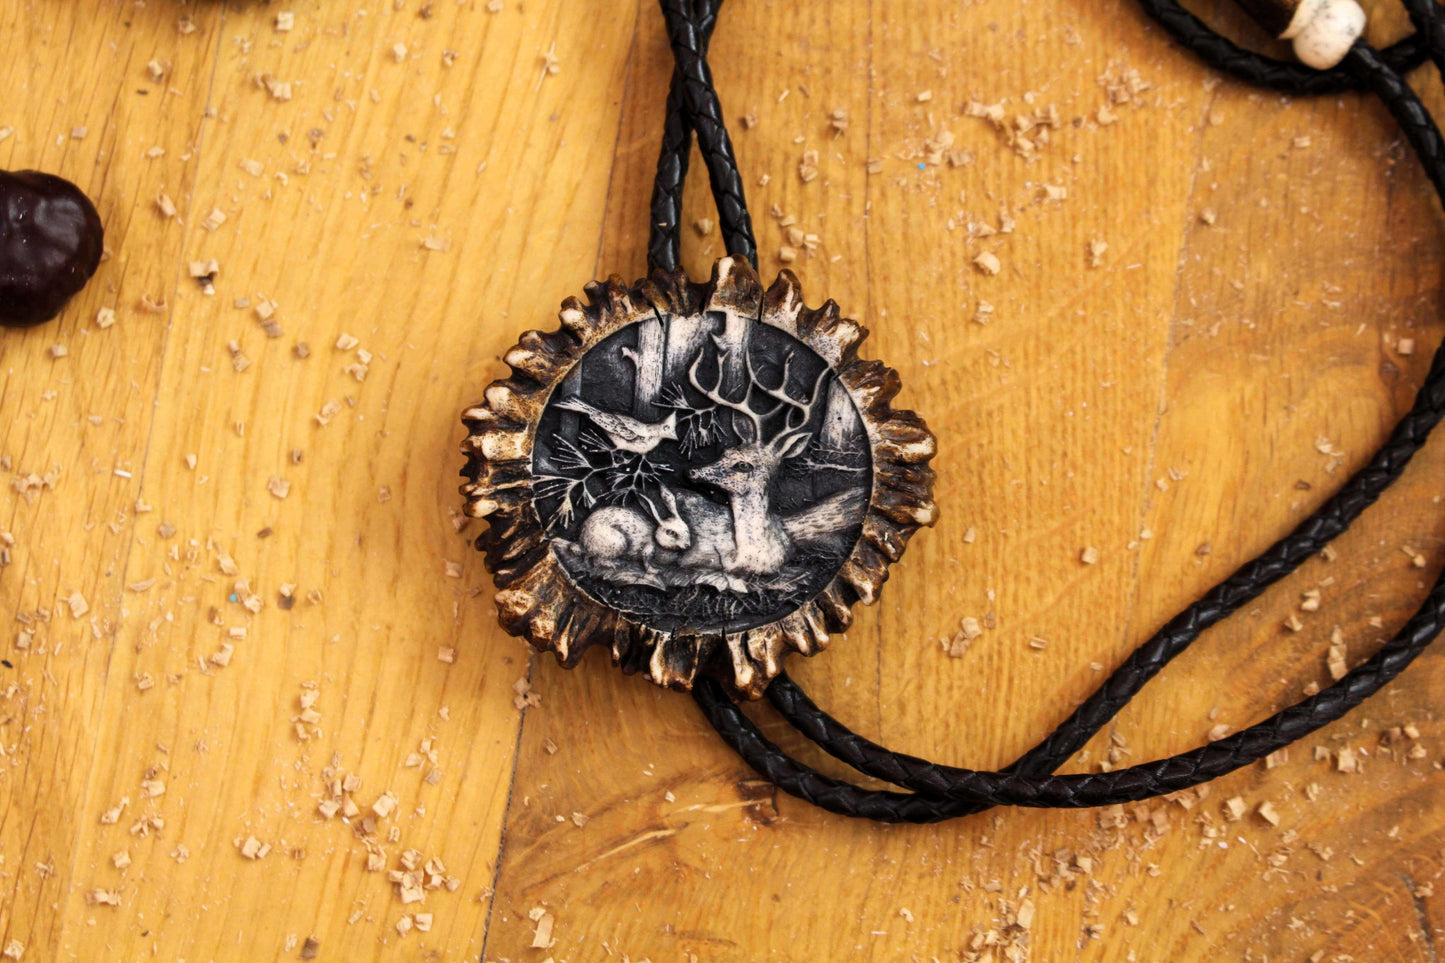 Handcrafted Bolo Tie with leather cord, Deer Antler tips and Nature Eidyllion Design